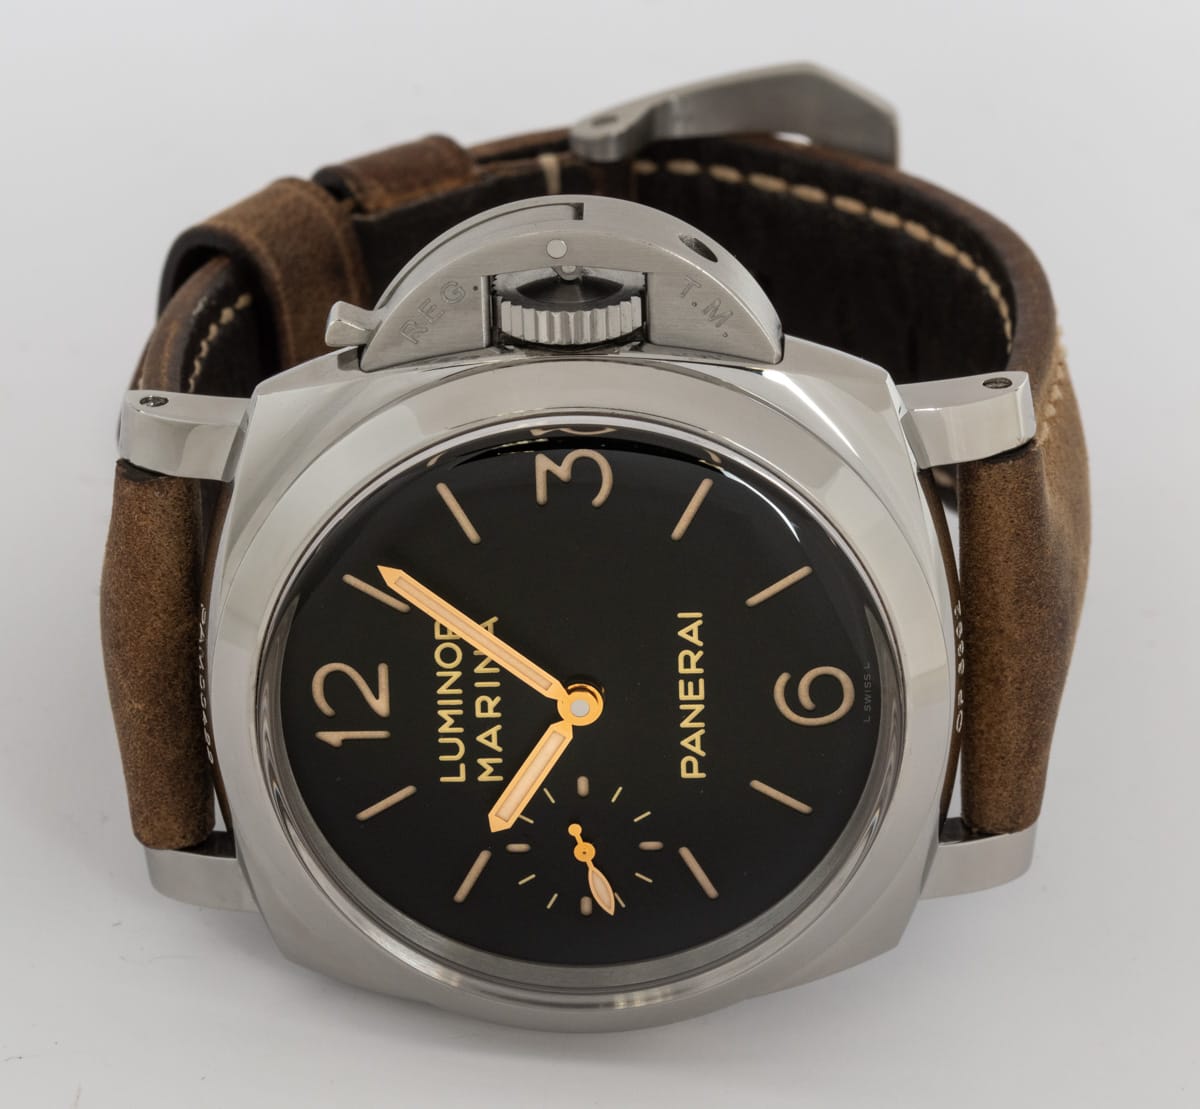 Front View of Luminor 1950 3 Days 47mm